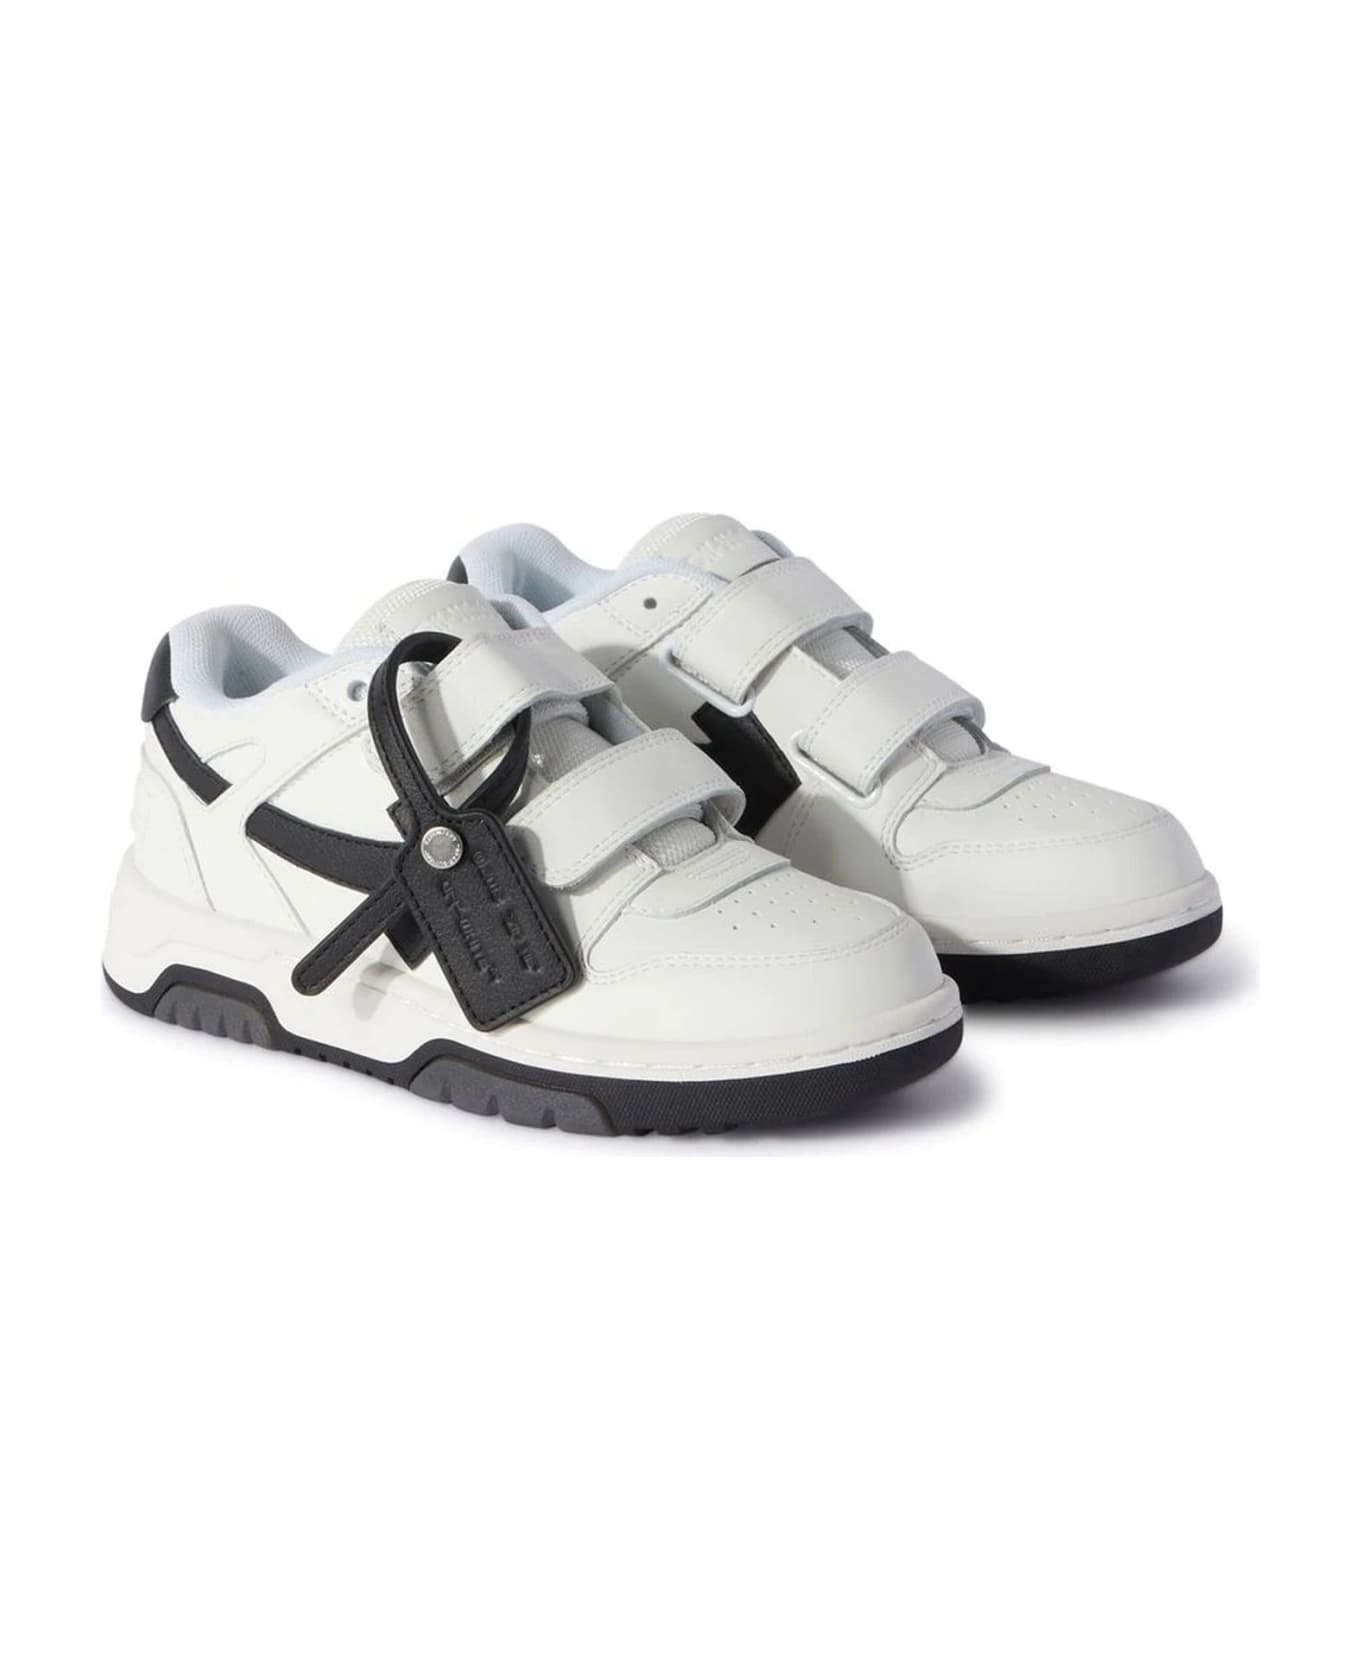 Off-White White Leather Sneakers - Bianco